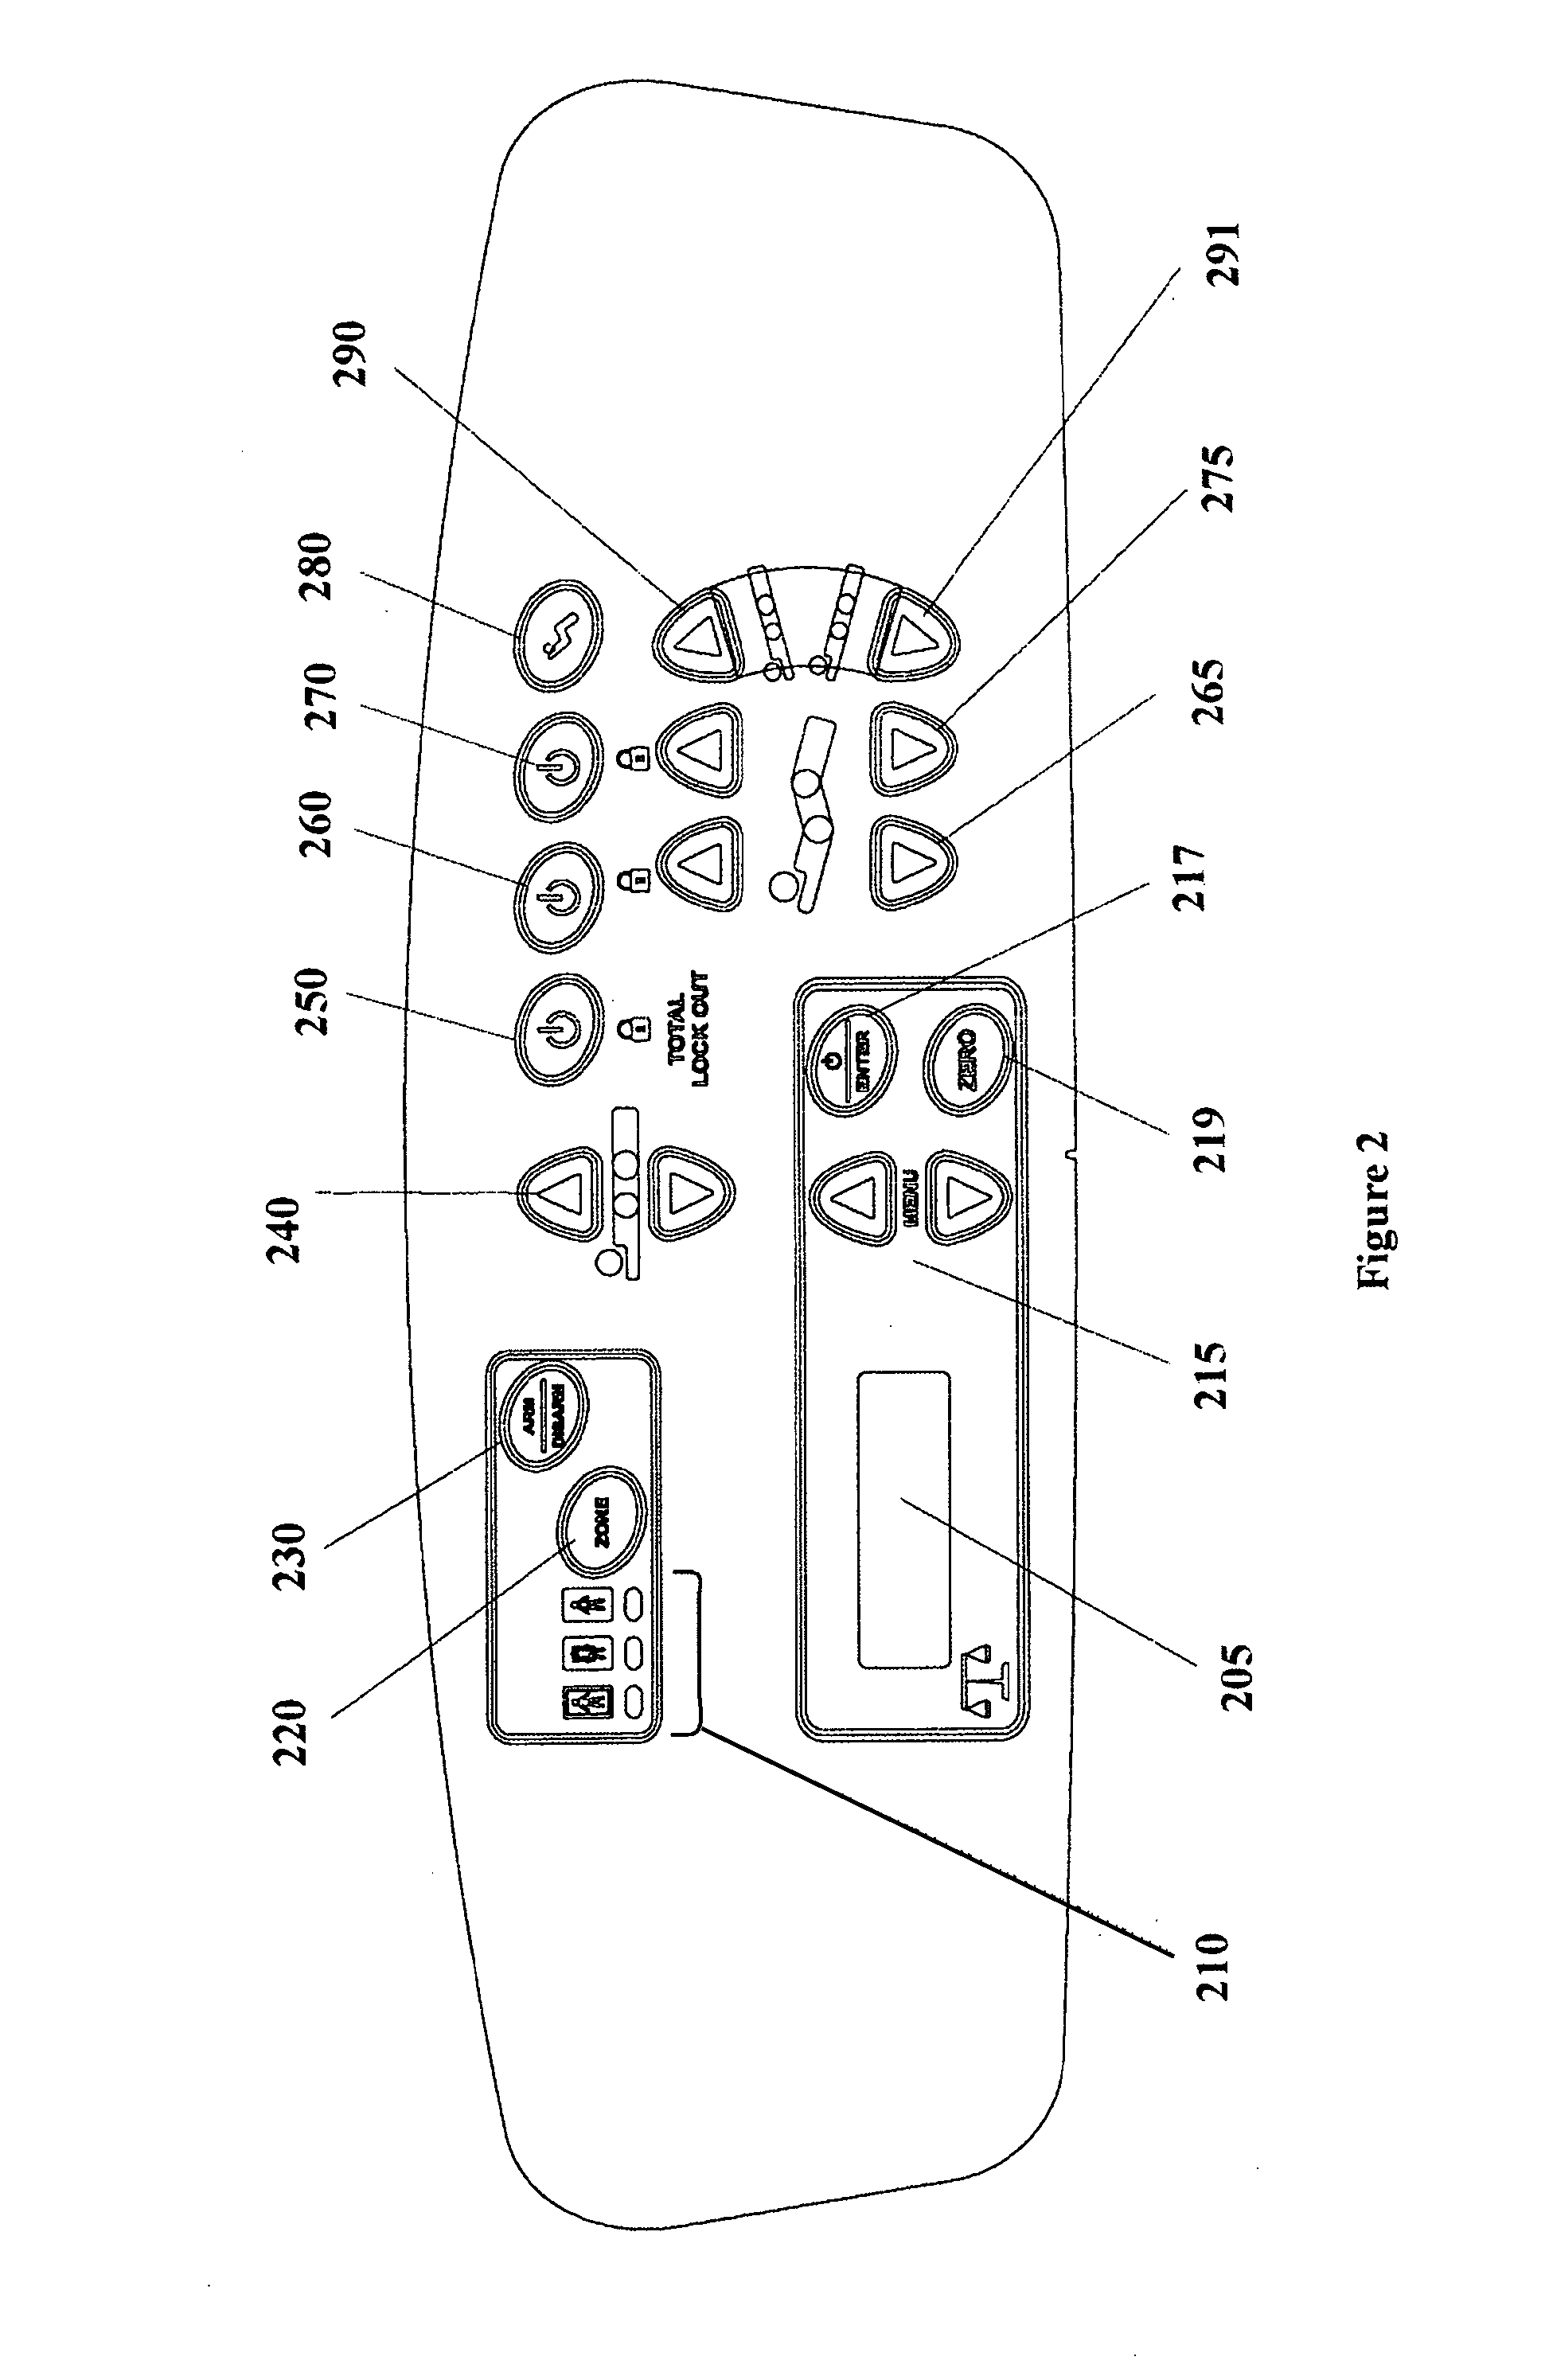 Diagnostic and control system for a patient support